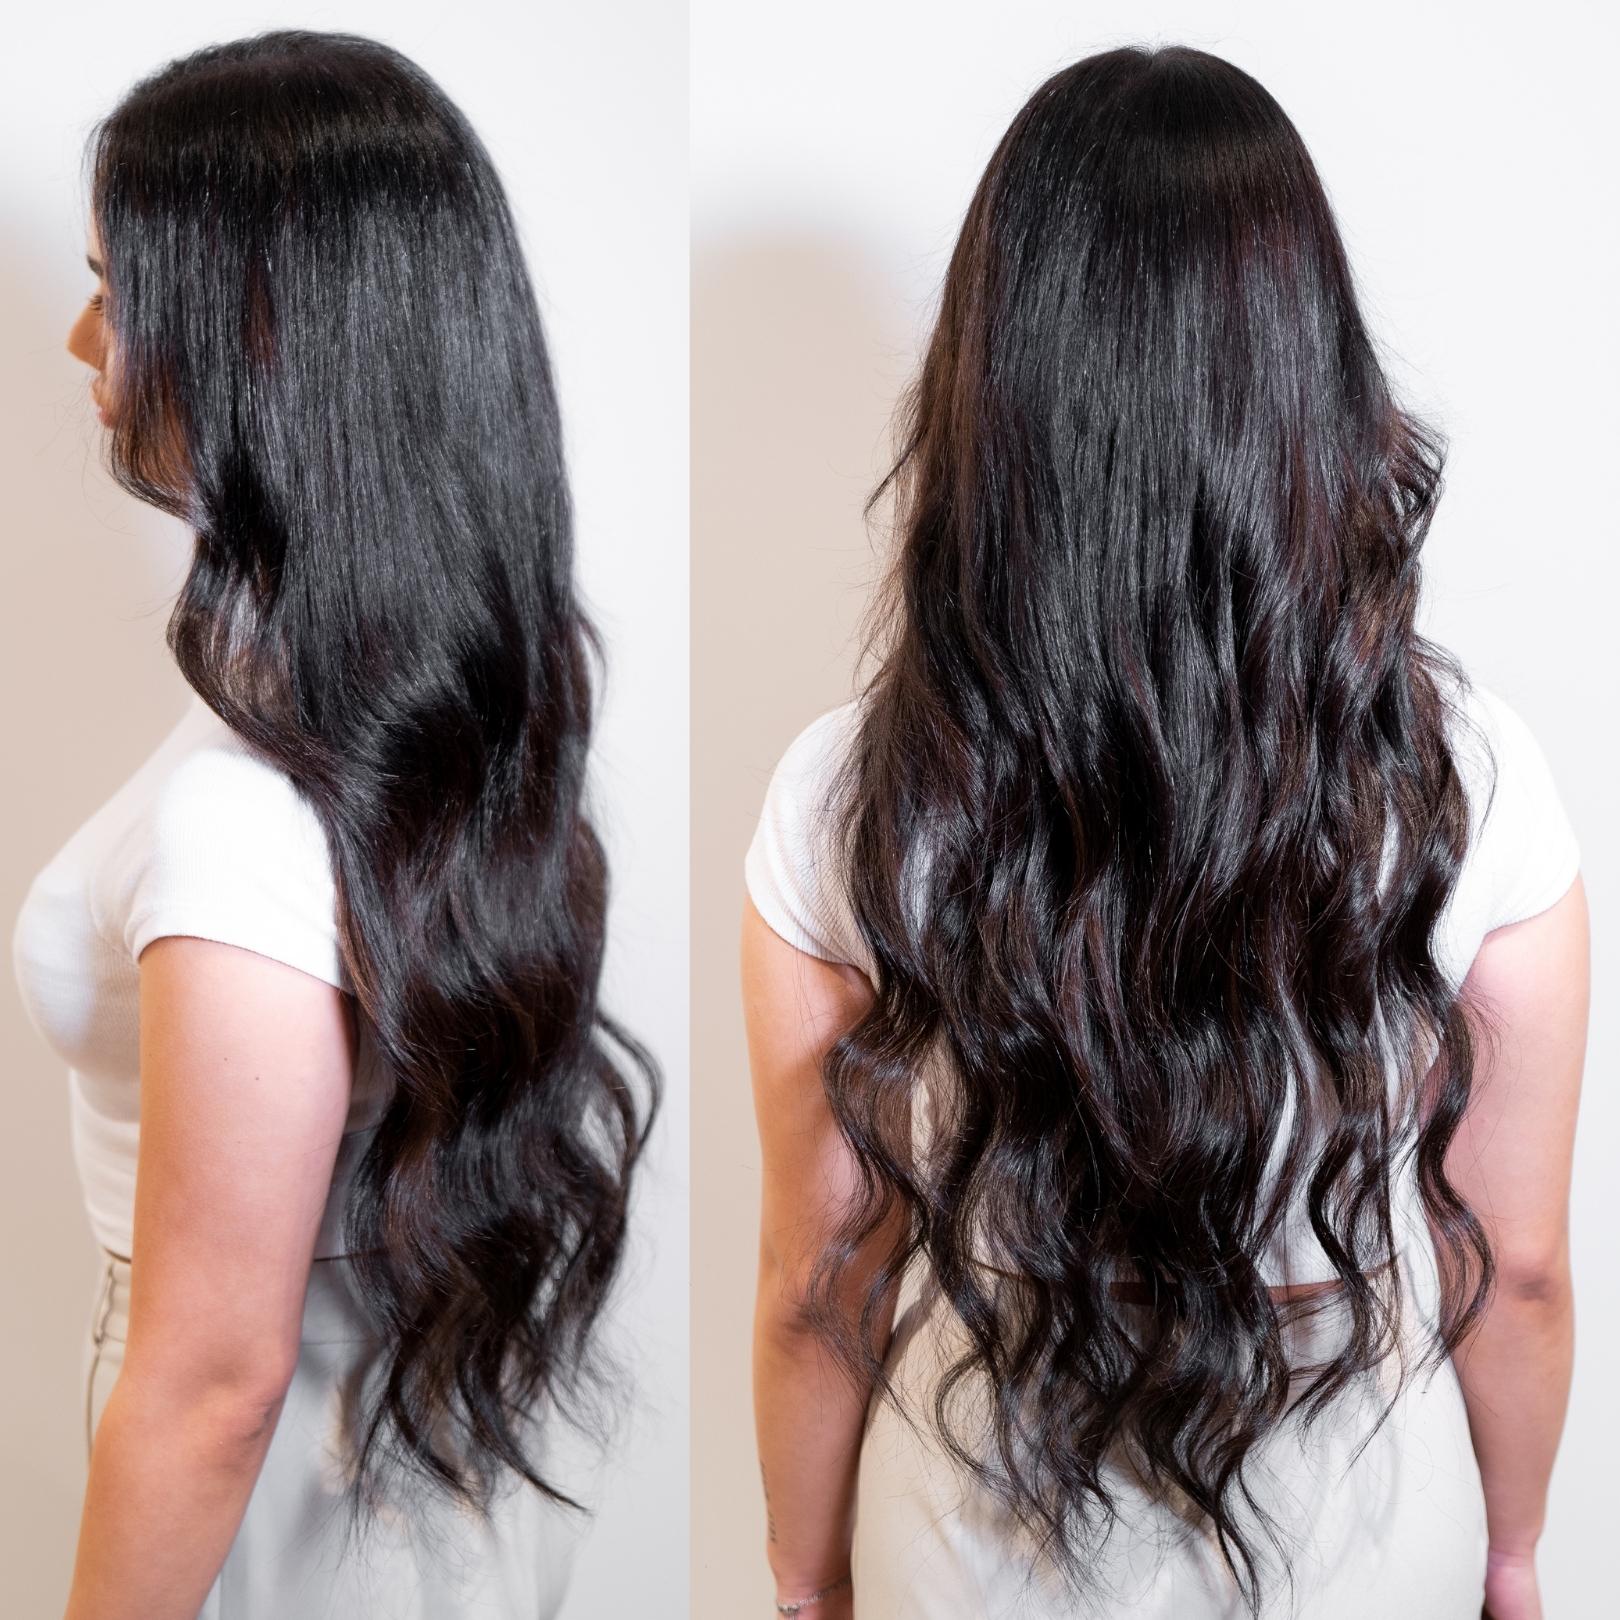 26" Weft Human Hair Extensions (No Clips)